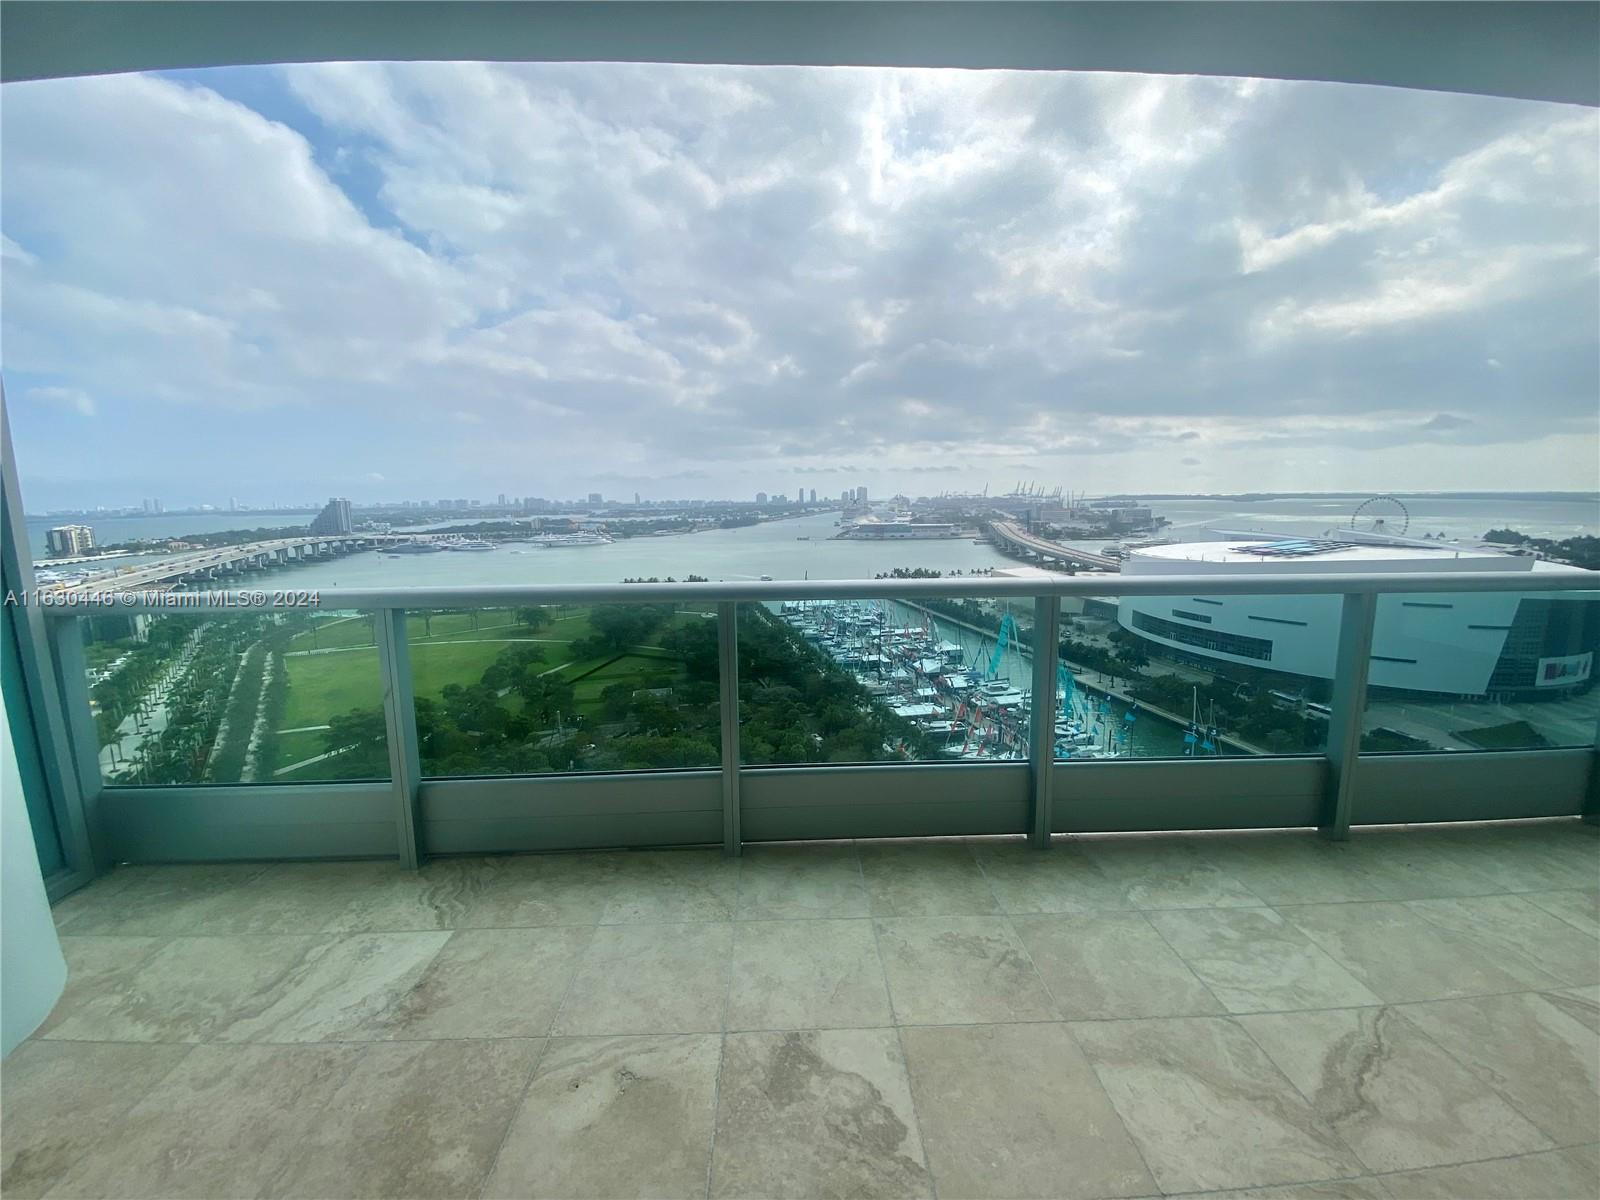 One bedroom + Den with 2 full bathrooms with amazing east water views to the Bay, Port, and Miami Beach Skyline. 10 feet ceiling with floor to ceiling sliding glass doors, Marble floors, Designer closets and finishes. Offer great amenities like movie theater, spa, fitness center, 2 pools, jacuzzi, library, community room, billiard tables, 24 hr security, concierge, valet parking, walking distance to the performing arts, science and art museums, arena and bayside. Available Oct 1, 2024.